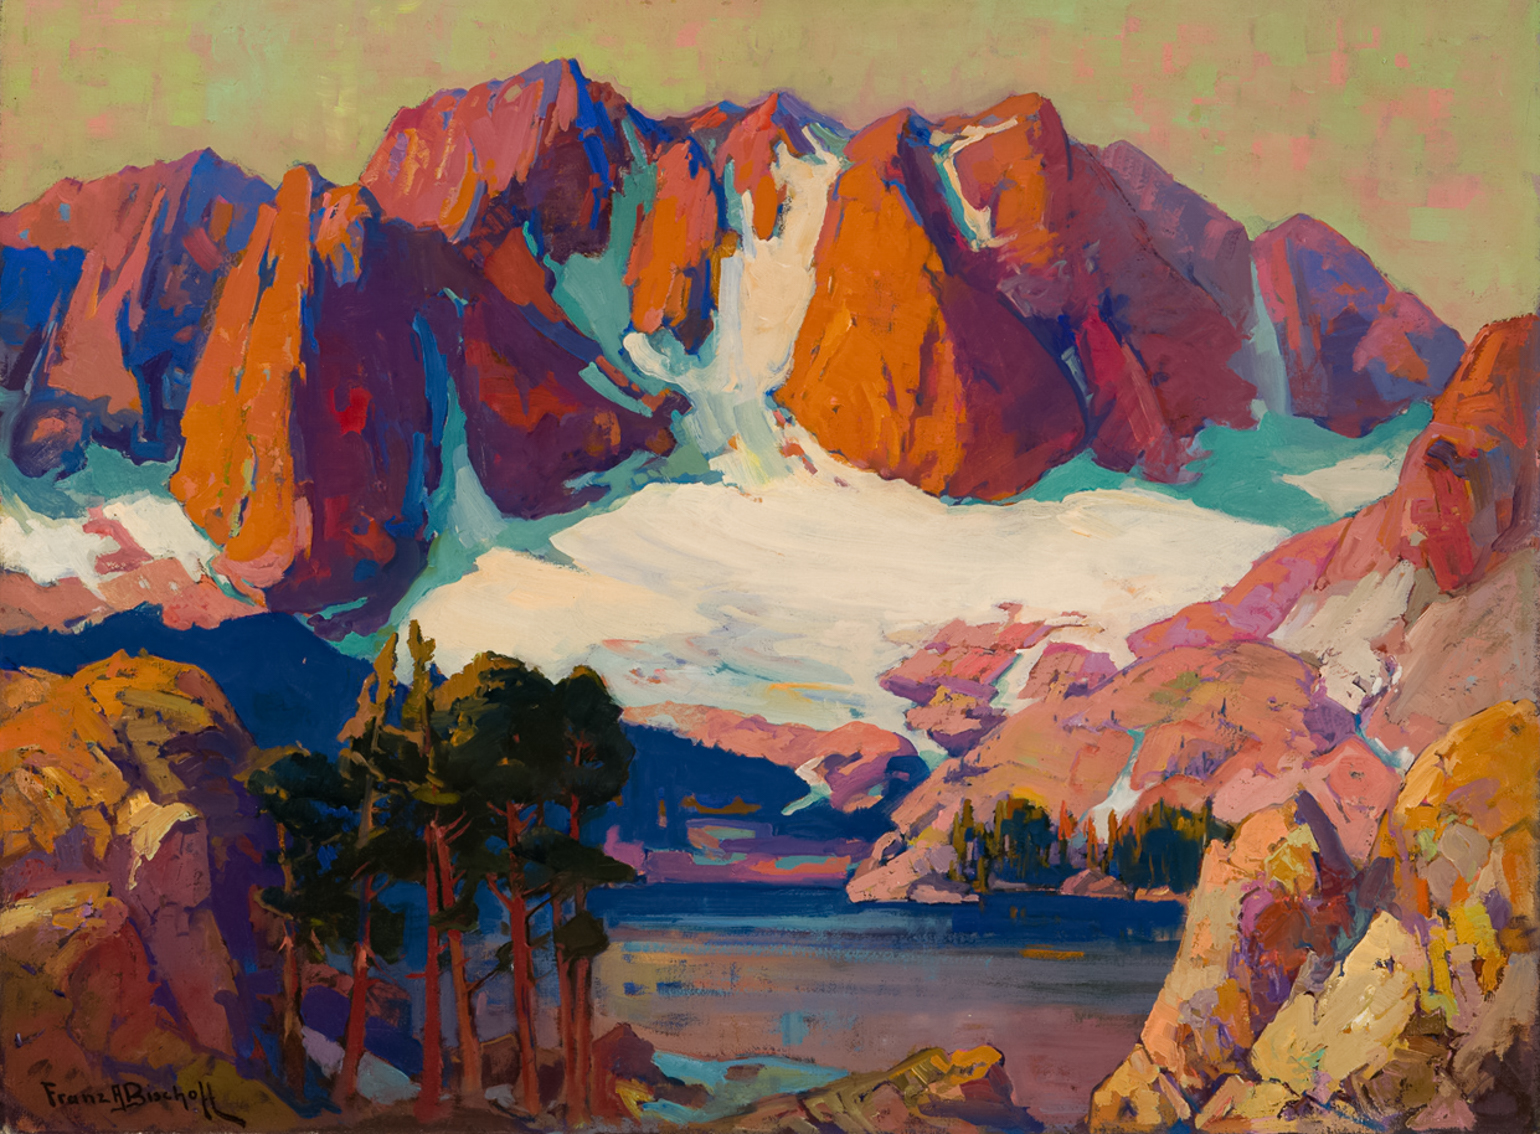 painting of snowy mountains with a body of water below